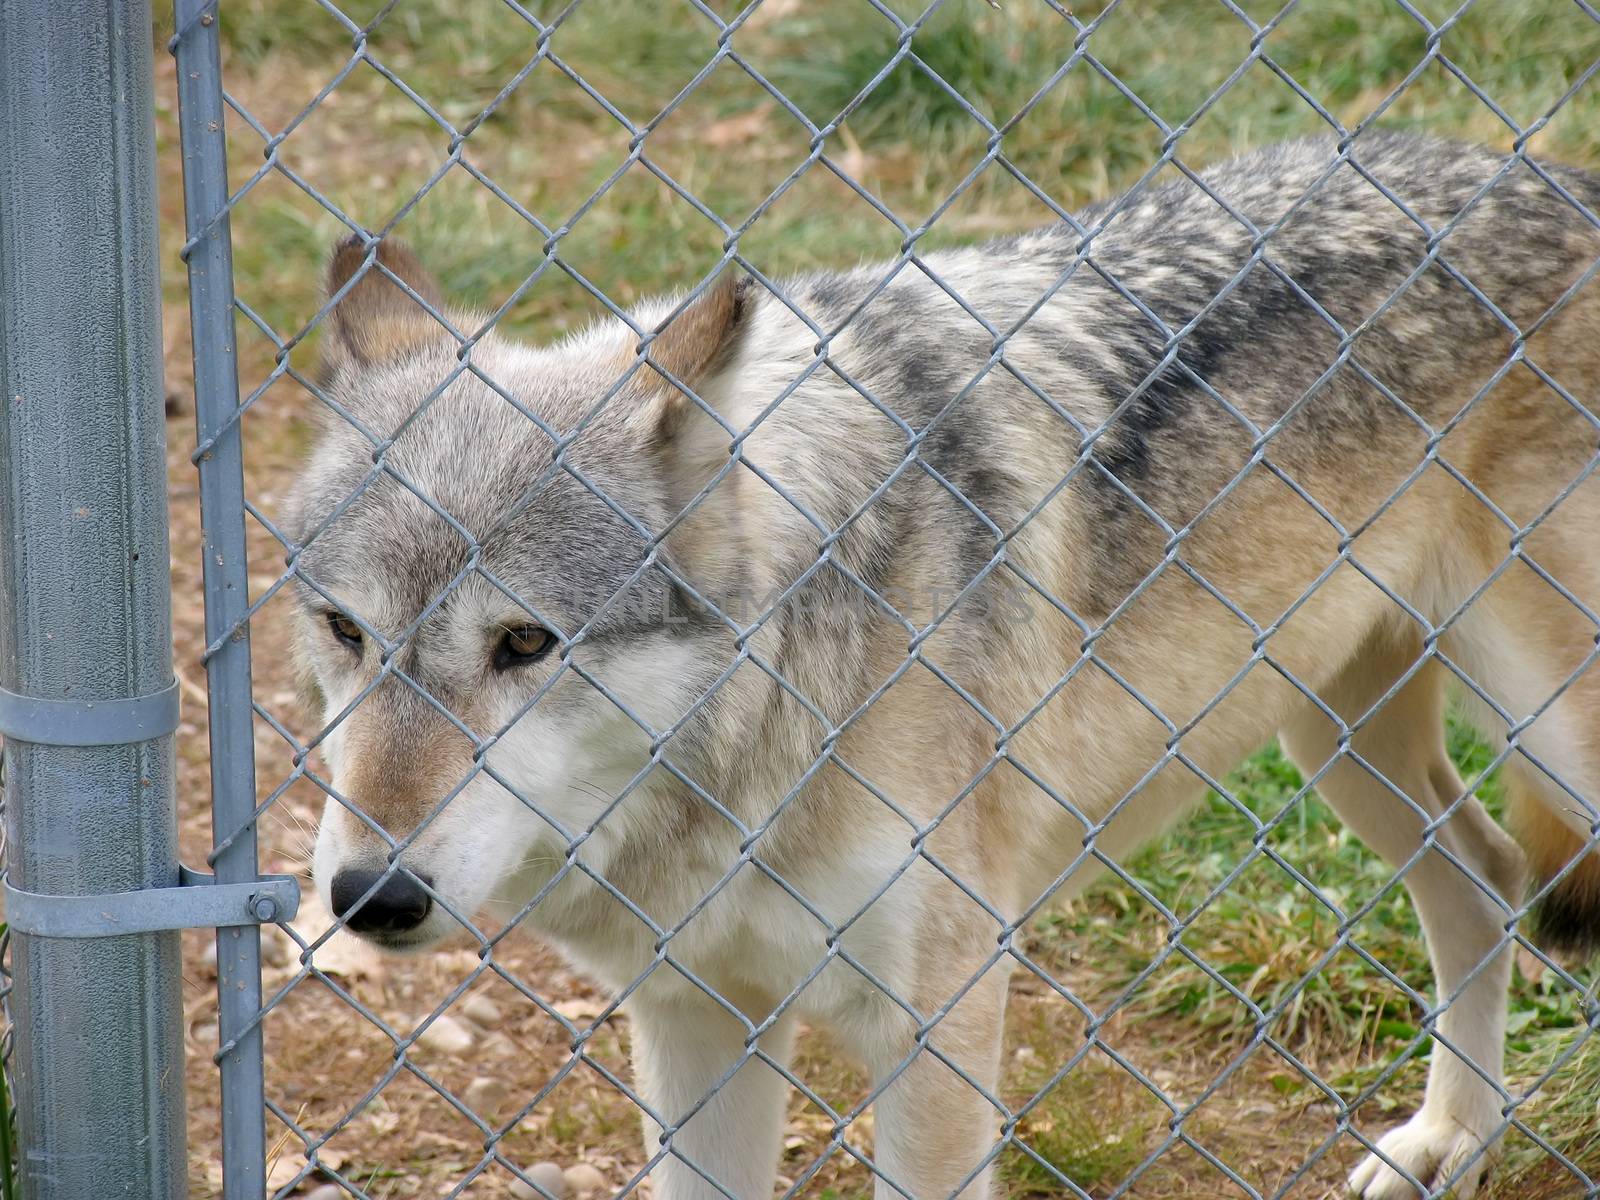 An image of a wolf behind a fence